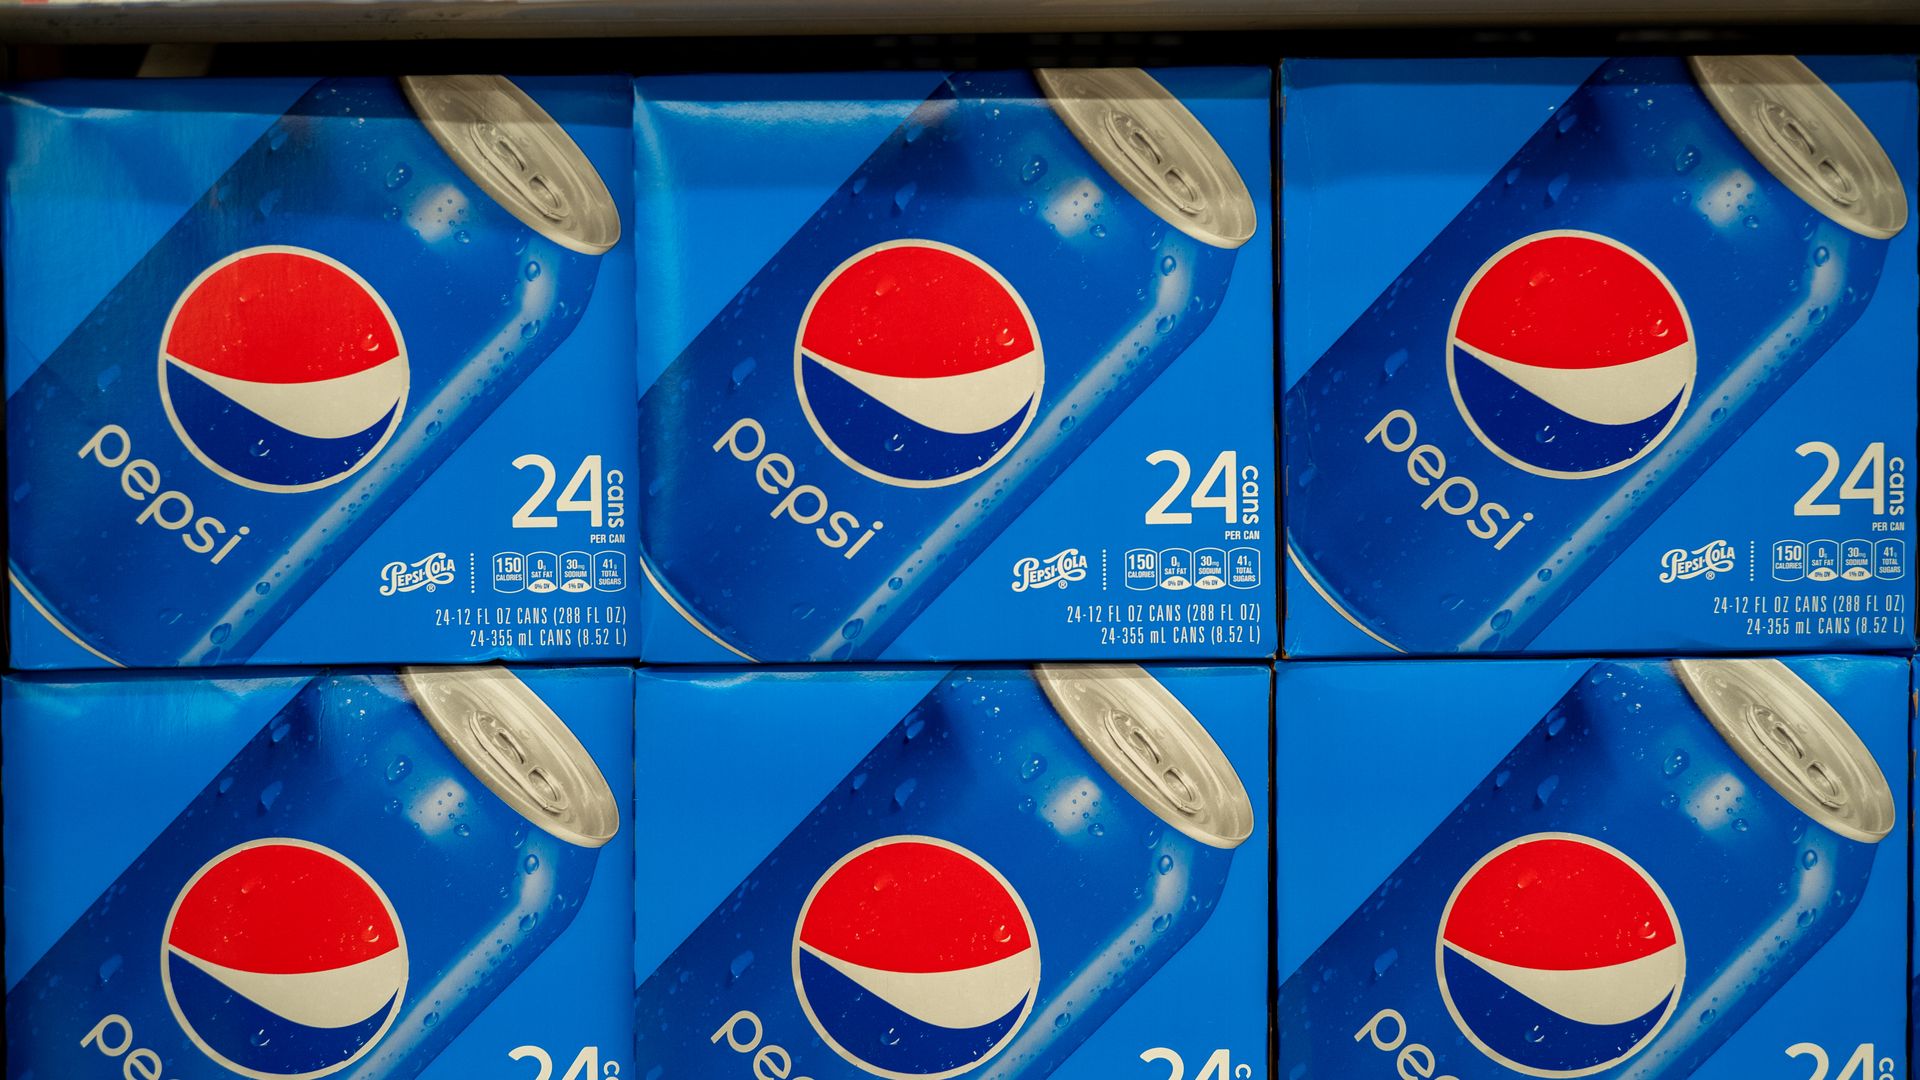 Boxes of pepsi cans in a row stacked